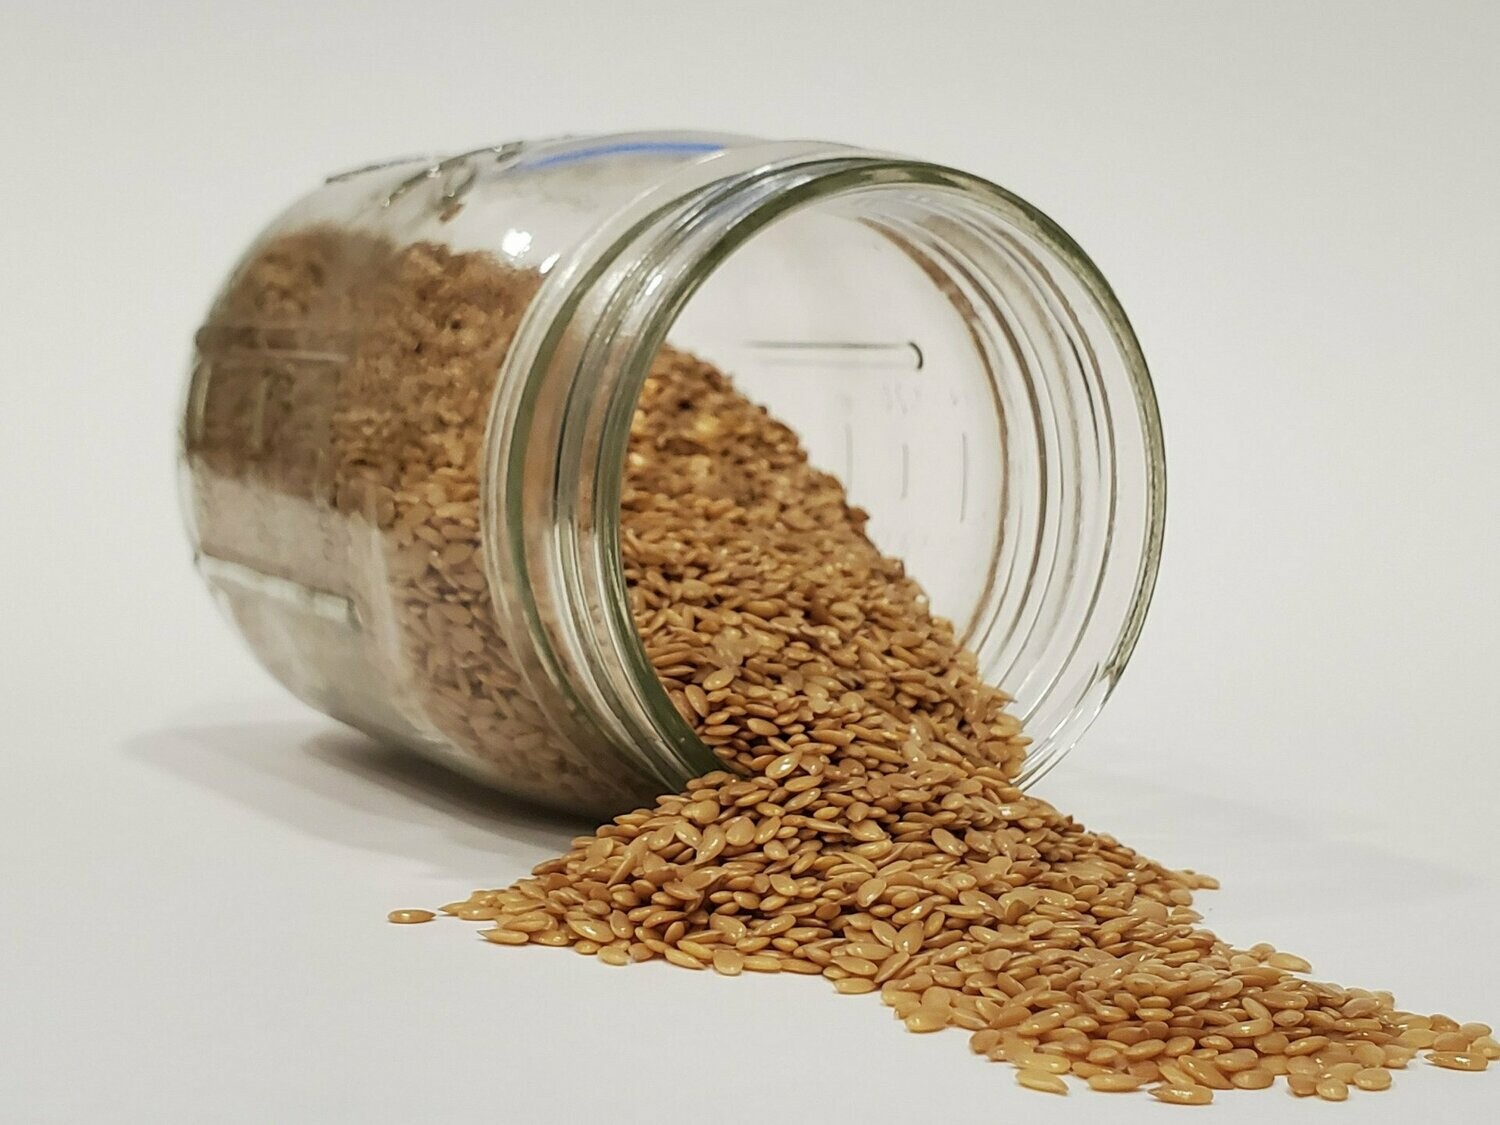 Golden Flax Seed